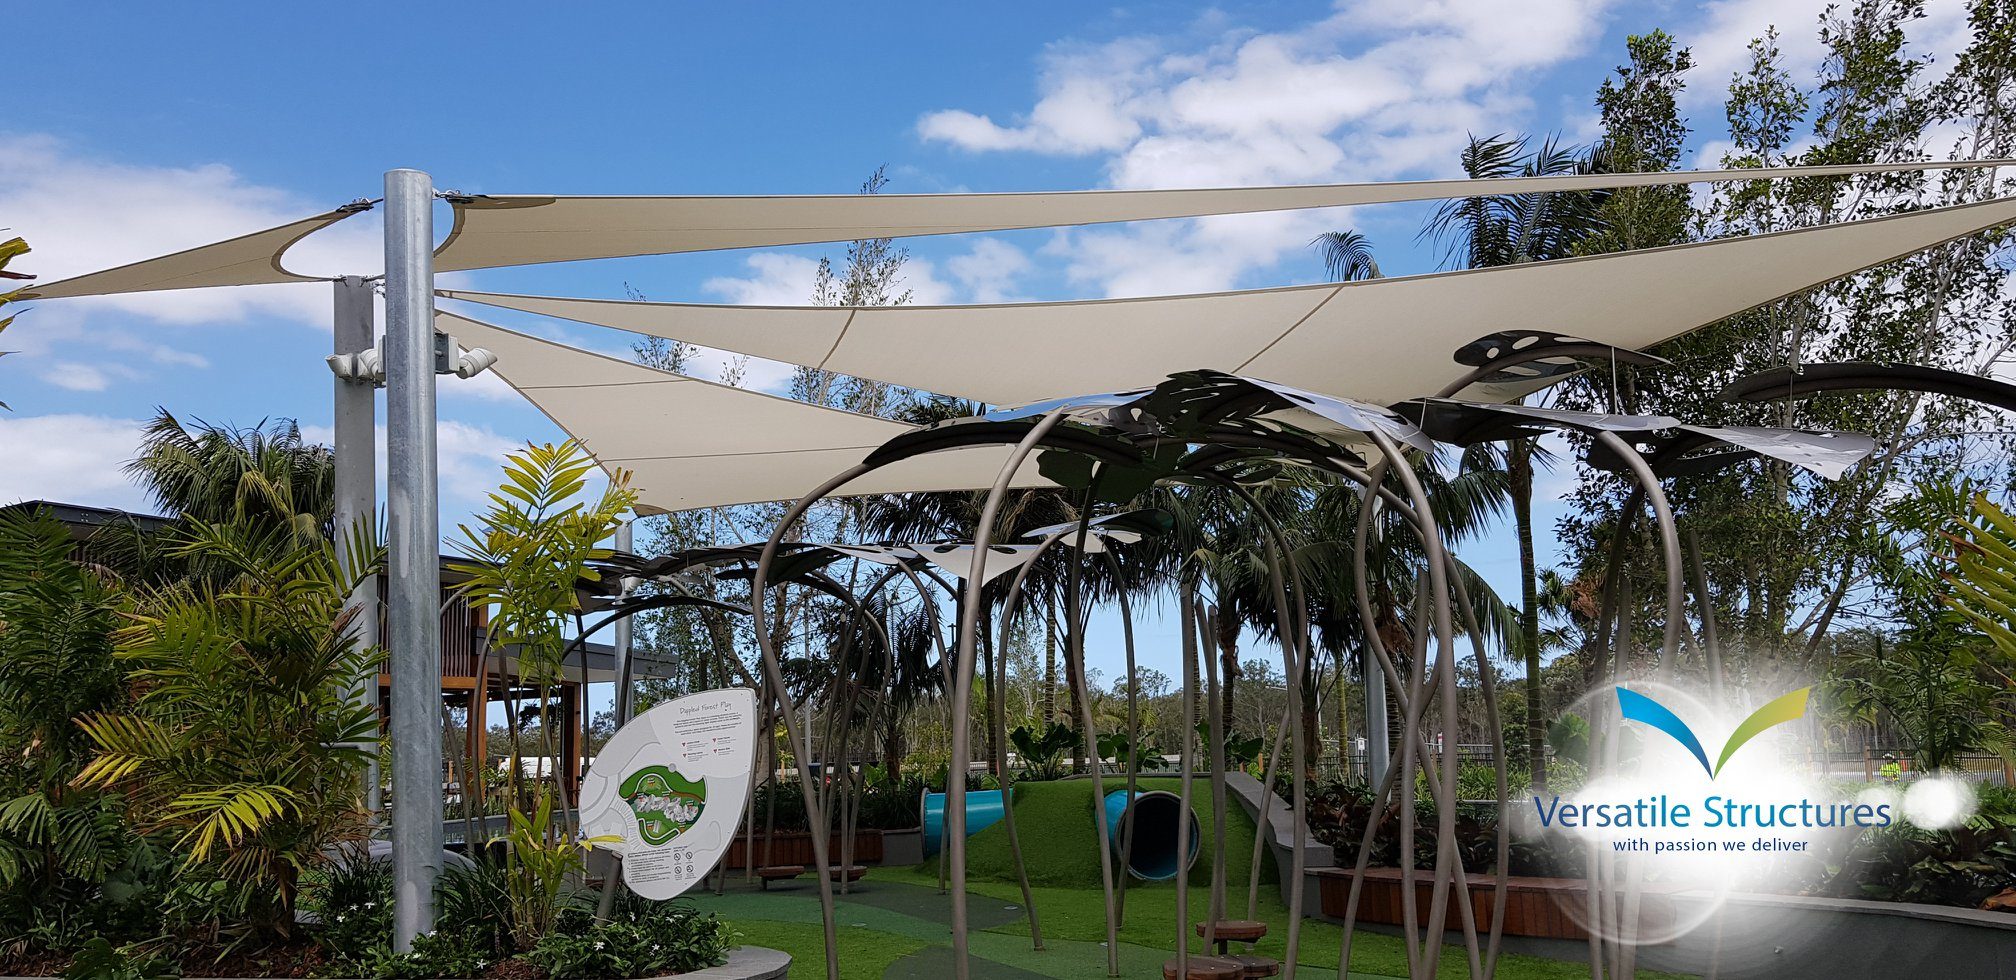 Westfield Coomera shade structure installed by Versatile Structures